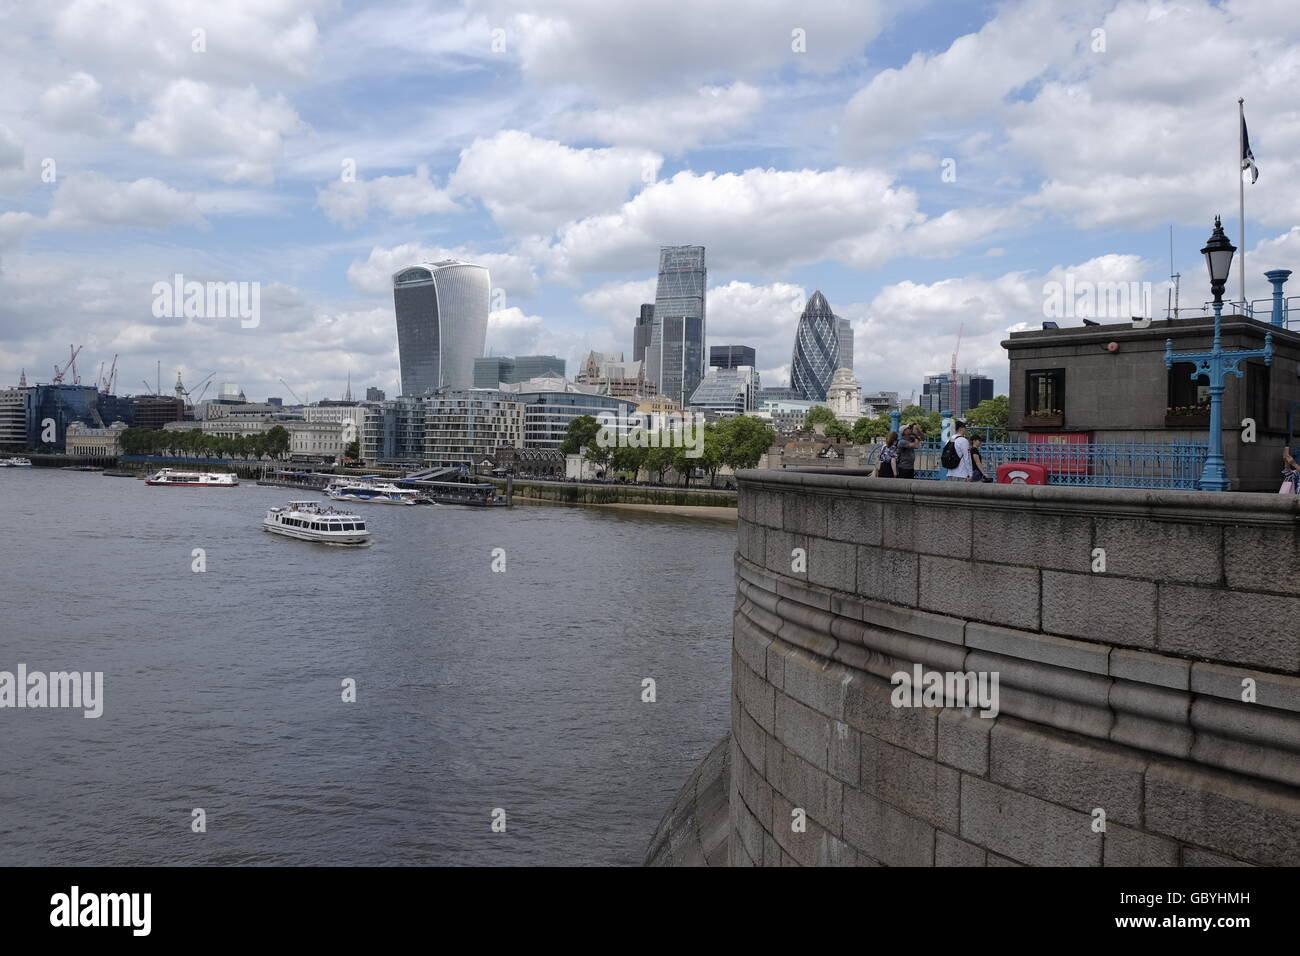 City of London CBD with The Walkie Talkie Cheese Grater and The Gherkin  London landmarks taken from Tower Bridge with the Thames in the foreground Stock Photo